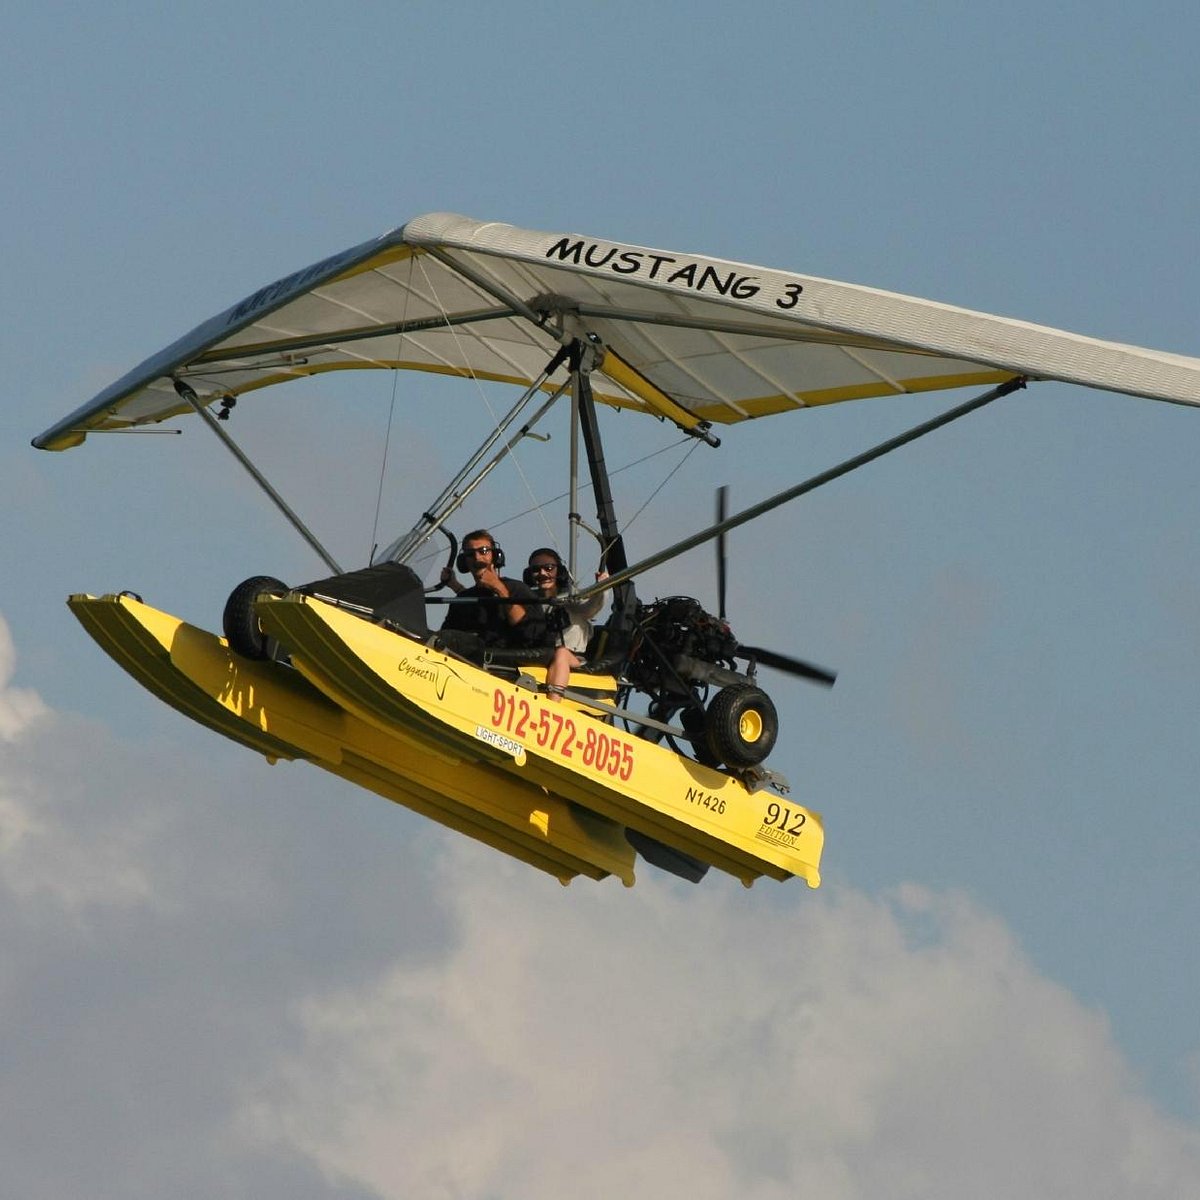 North Wing - Quality Light Sport Aircraft, Weight Shift Control